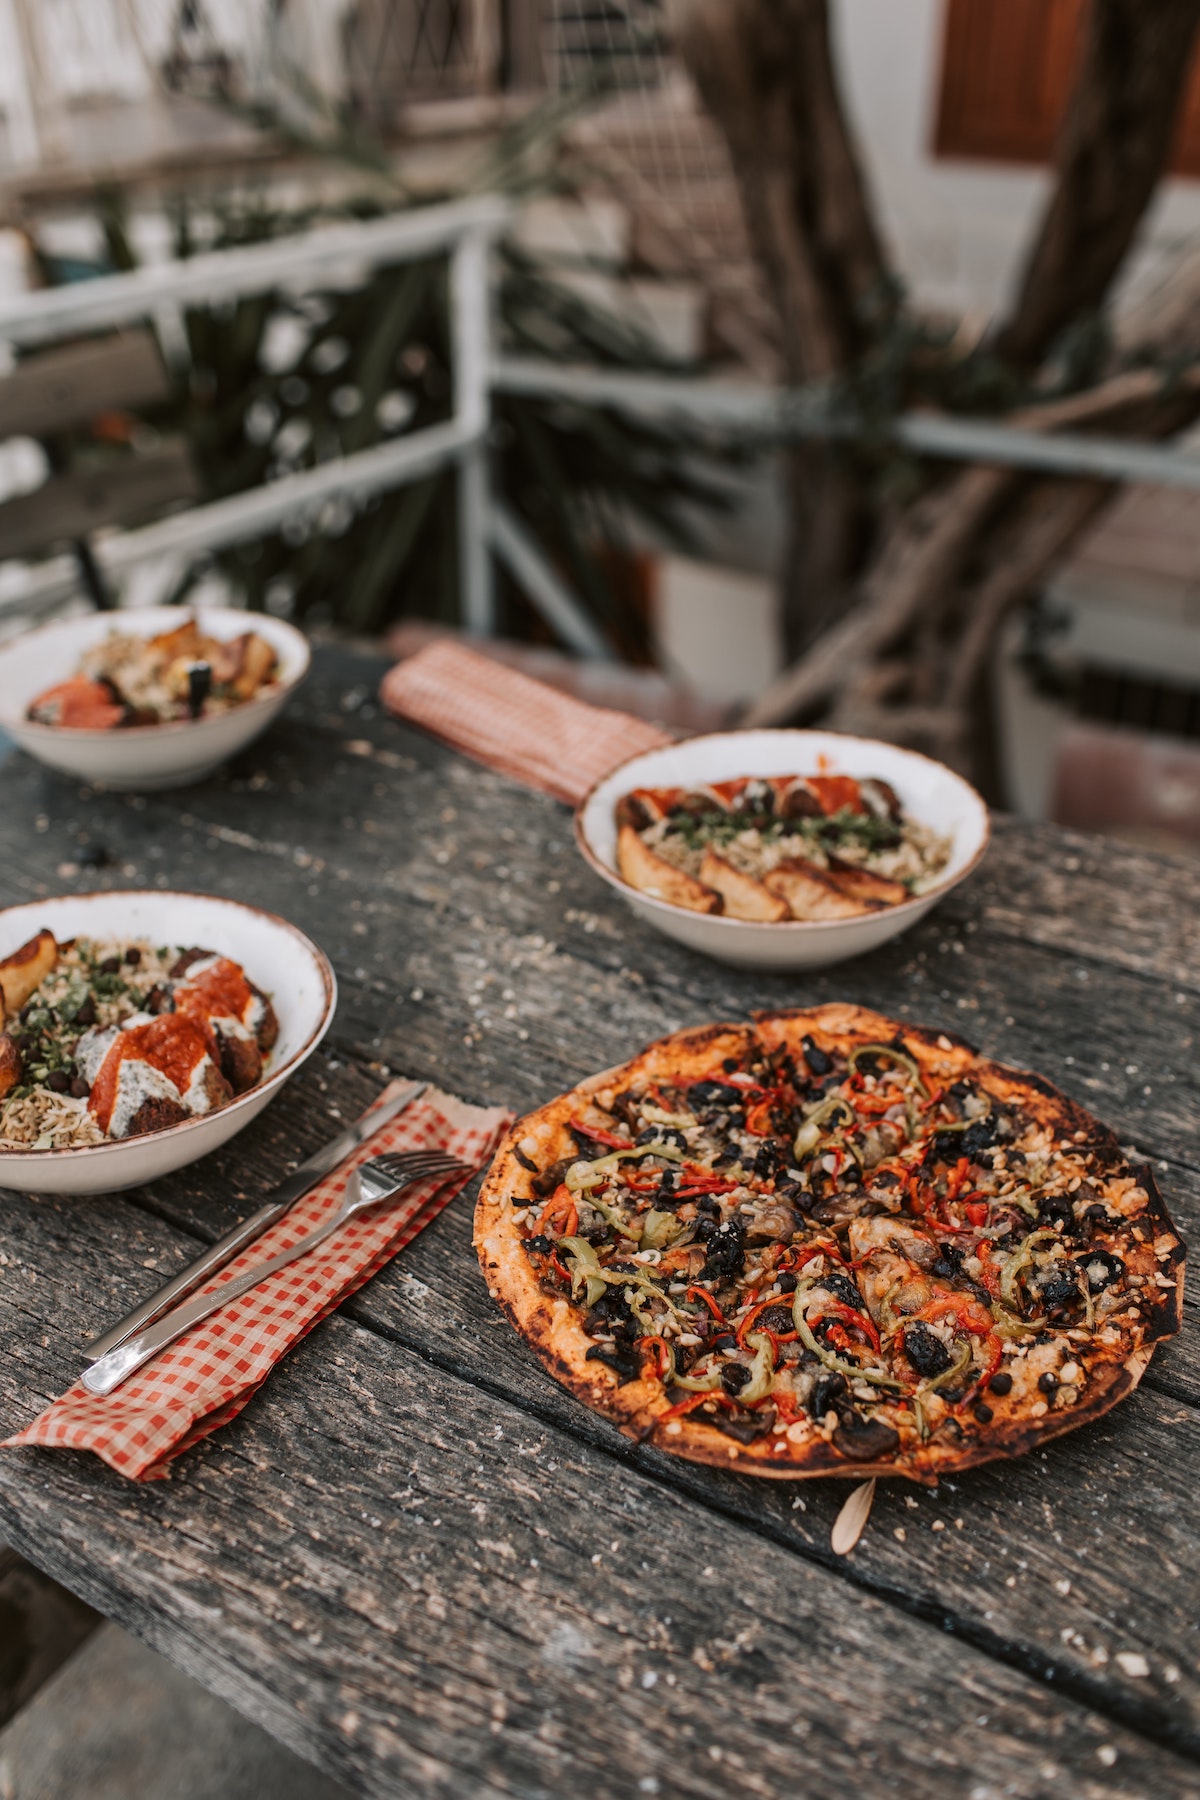 Vegan pizza and bowls of food on a wooden picnic table